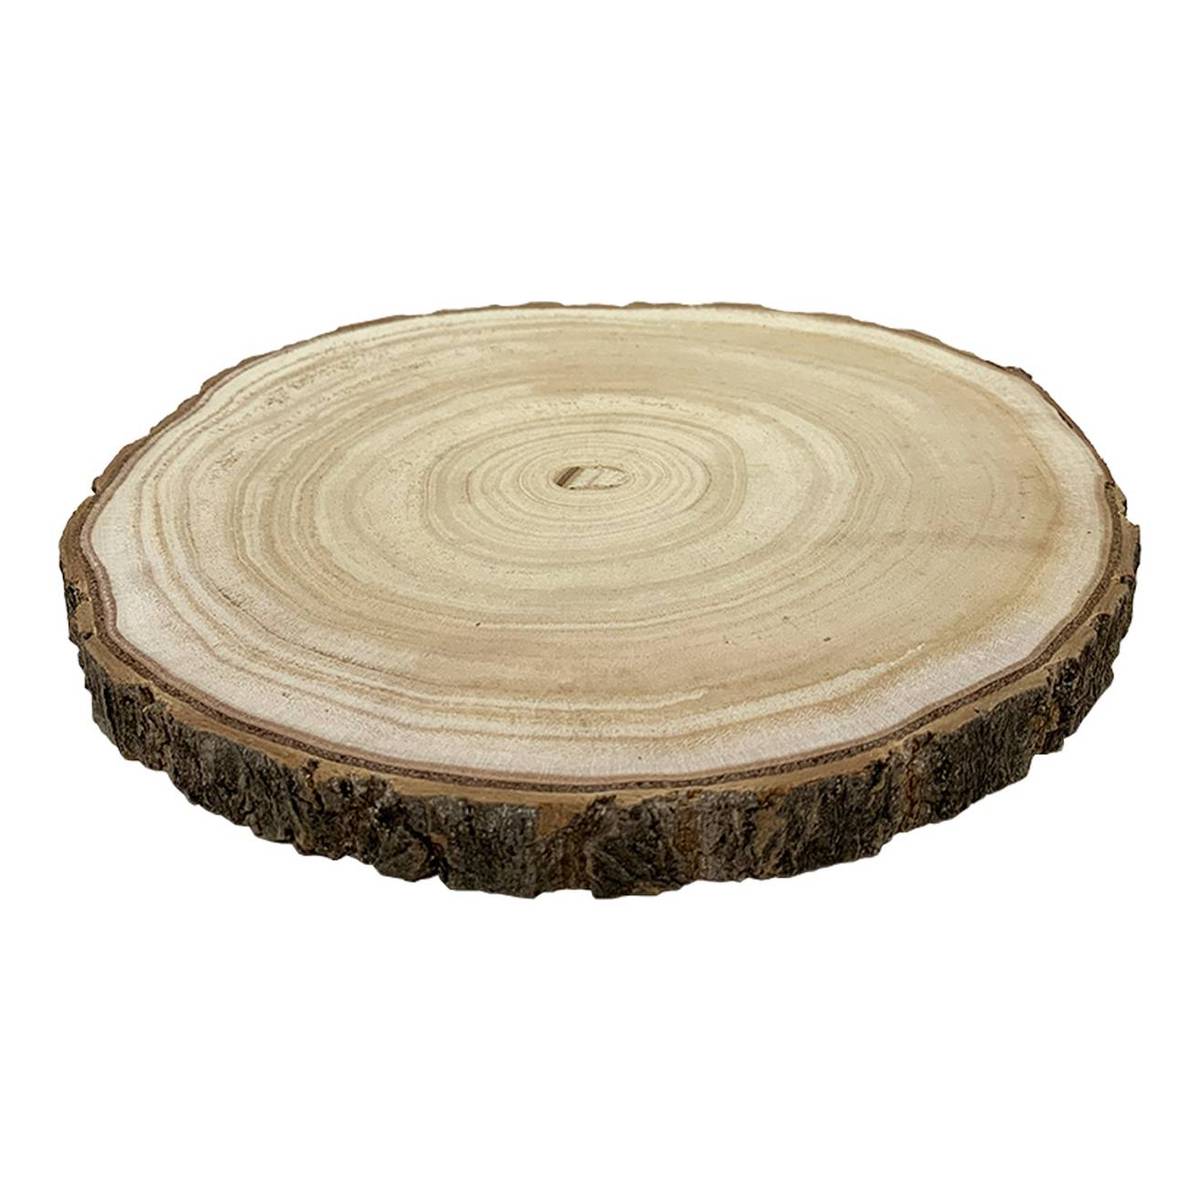 Display Cake Board Footed Round 25 cm 9.8 Inch